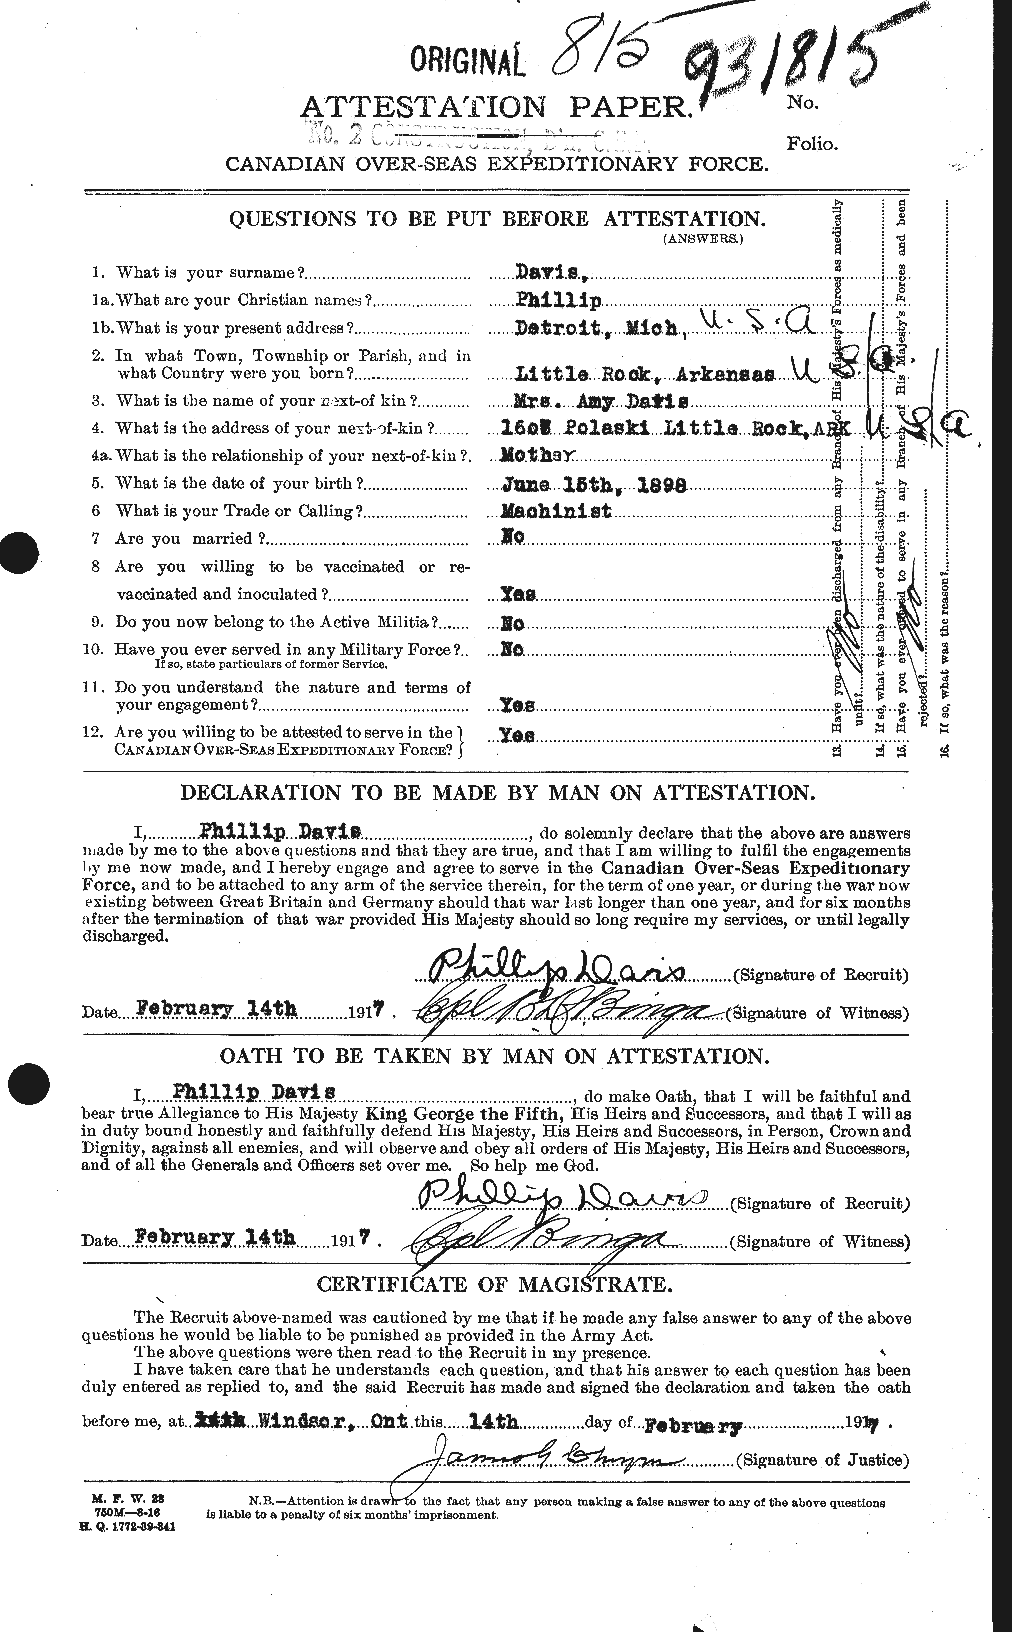 Personnel Records of the First World War - CEF 284228a